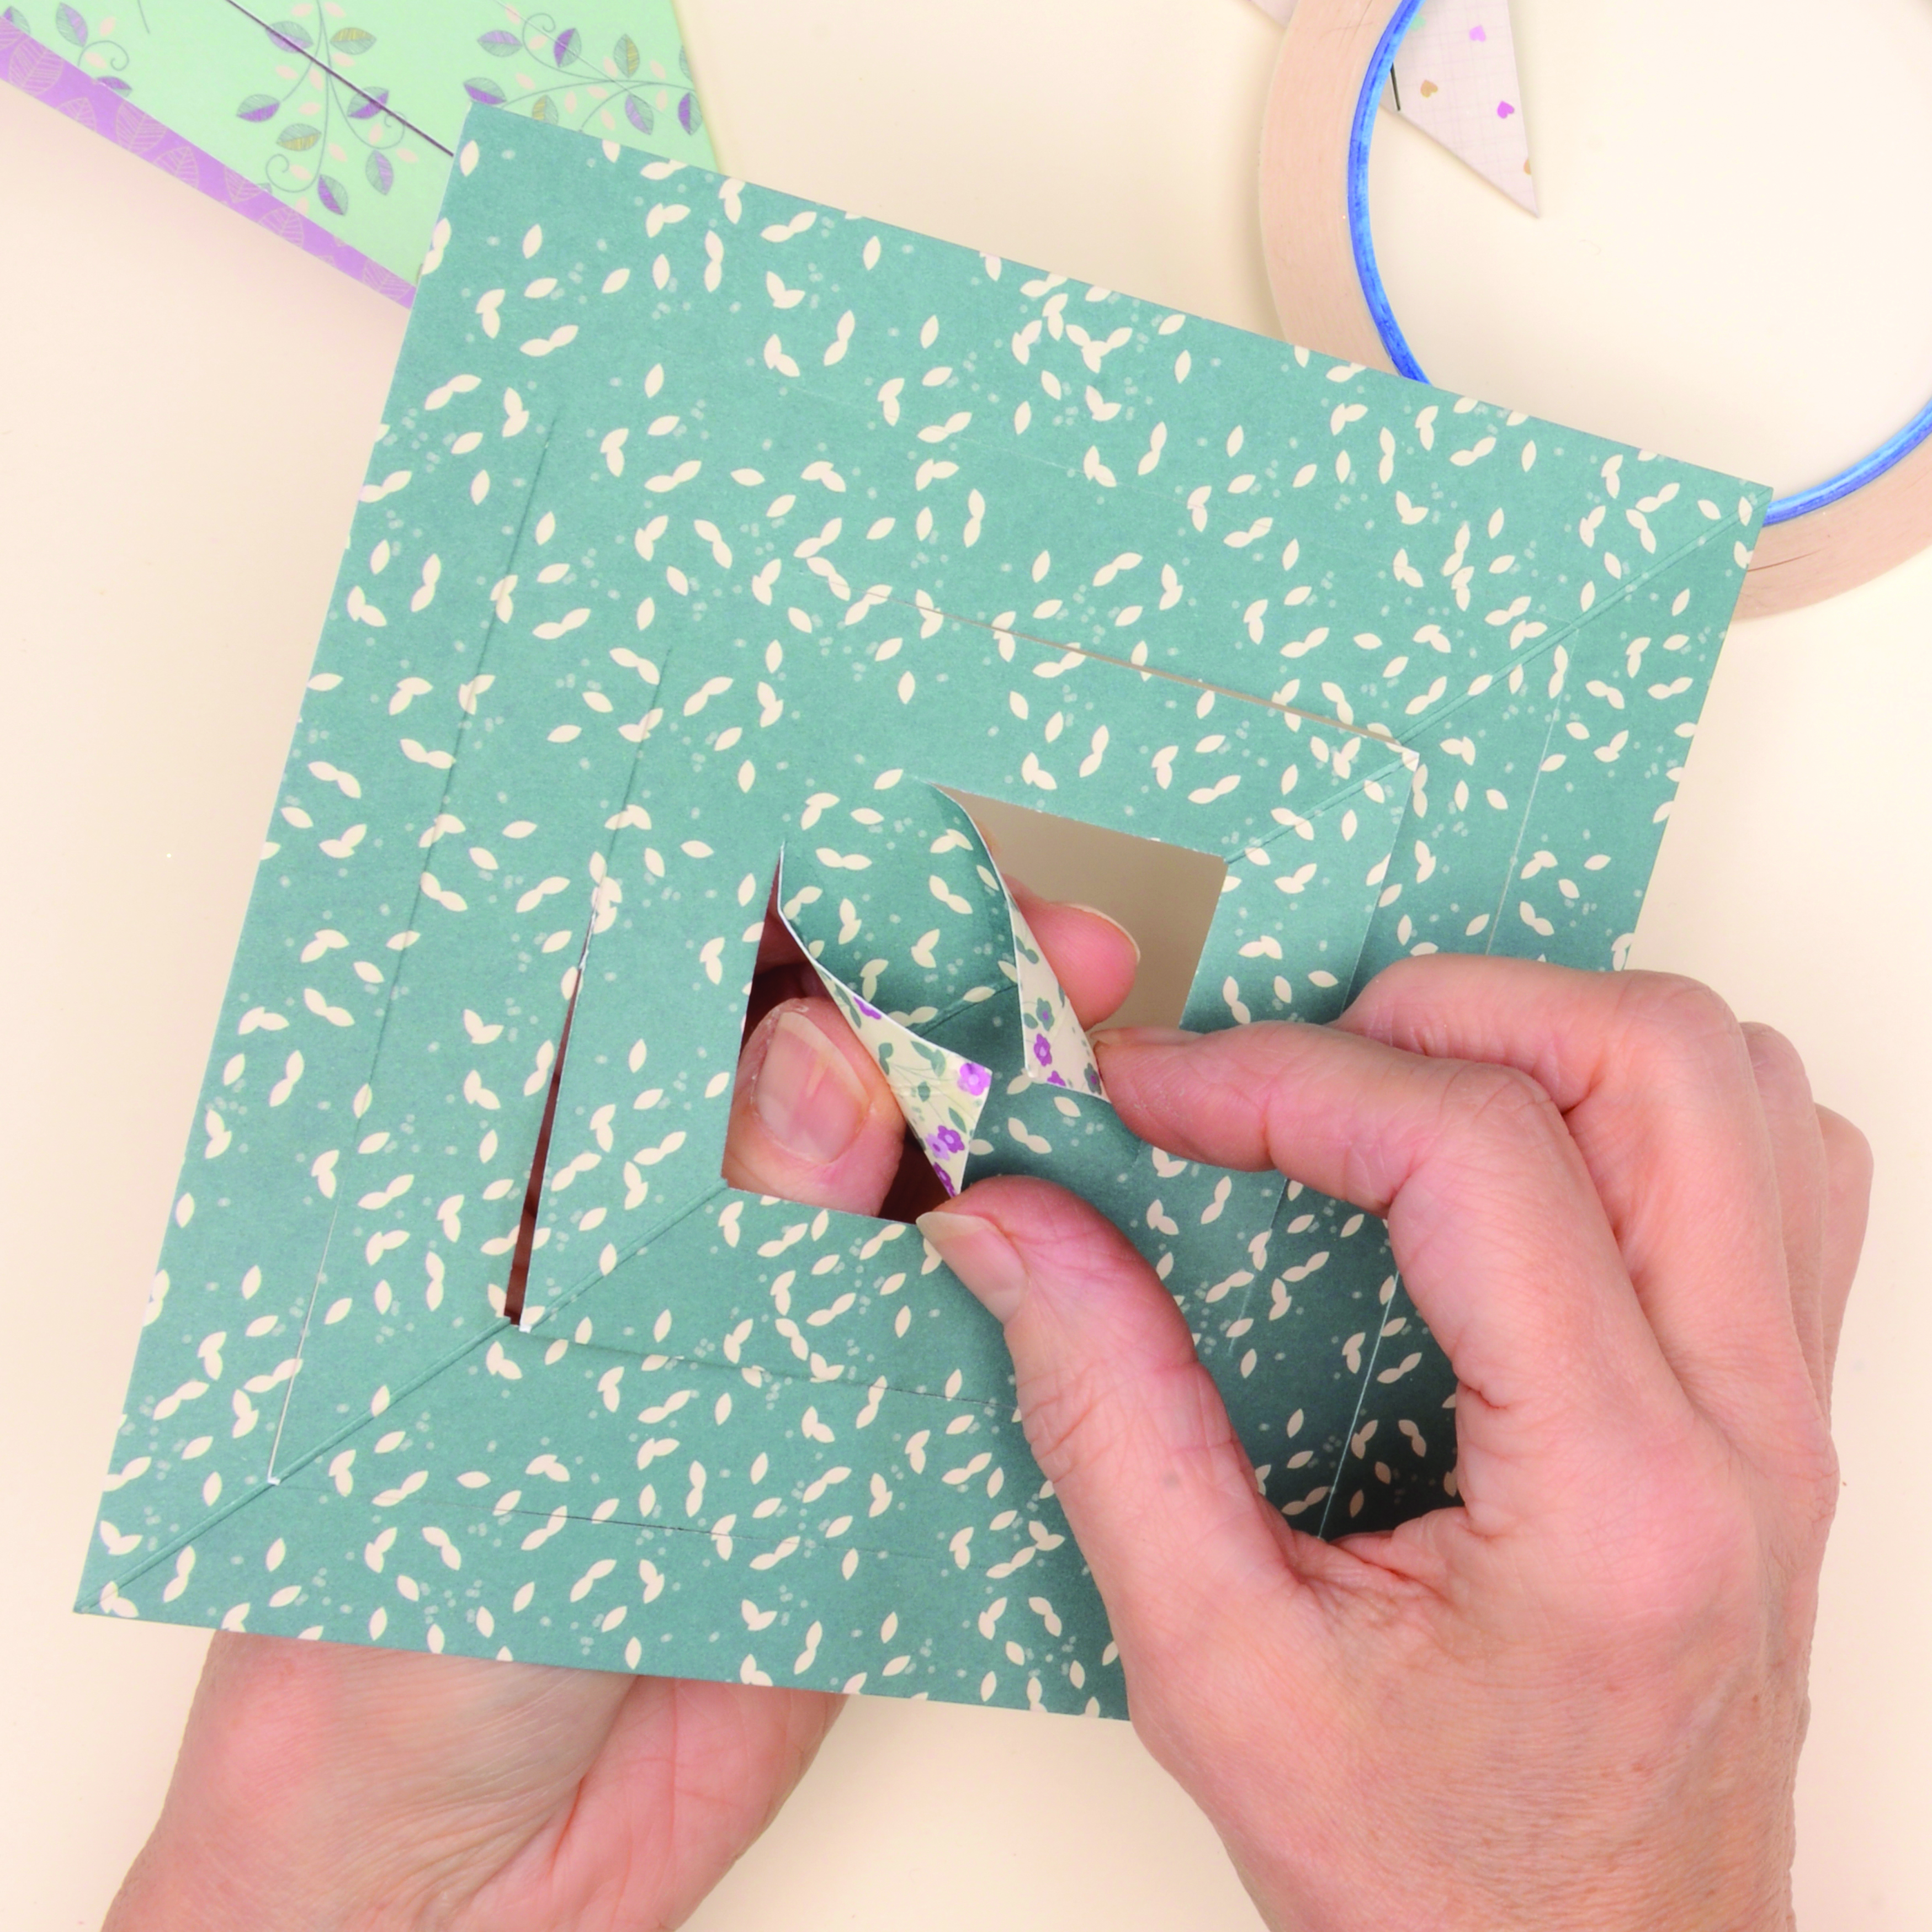 How to make a 3d paper snowflake – step 4